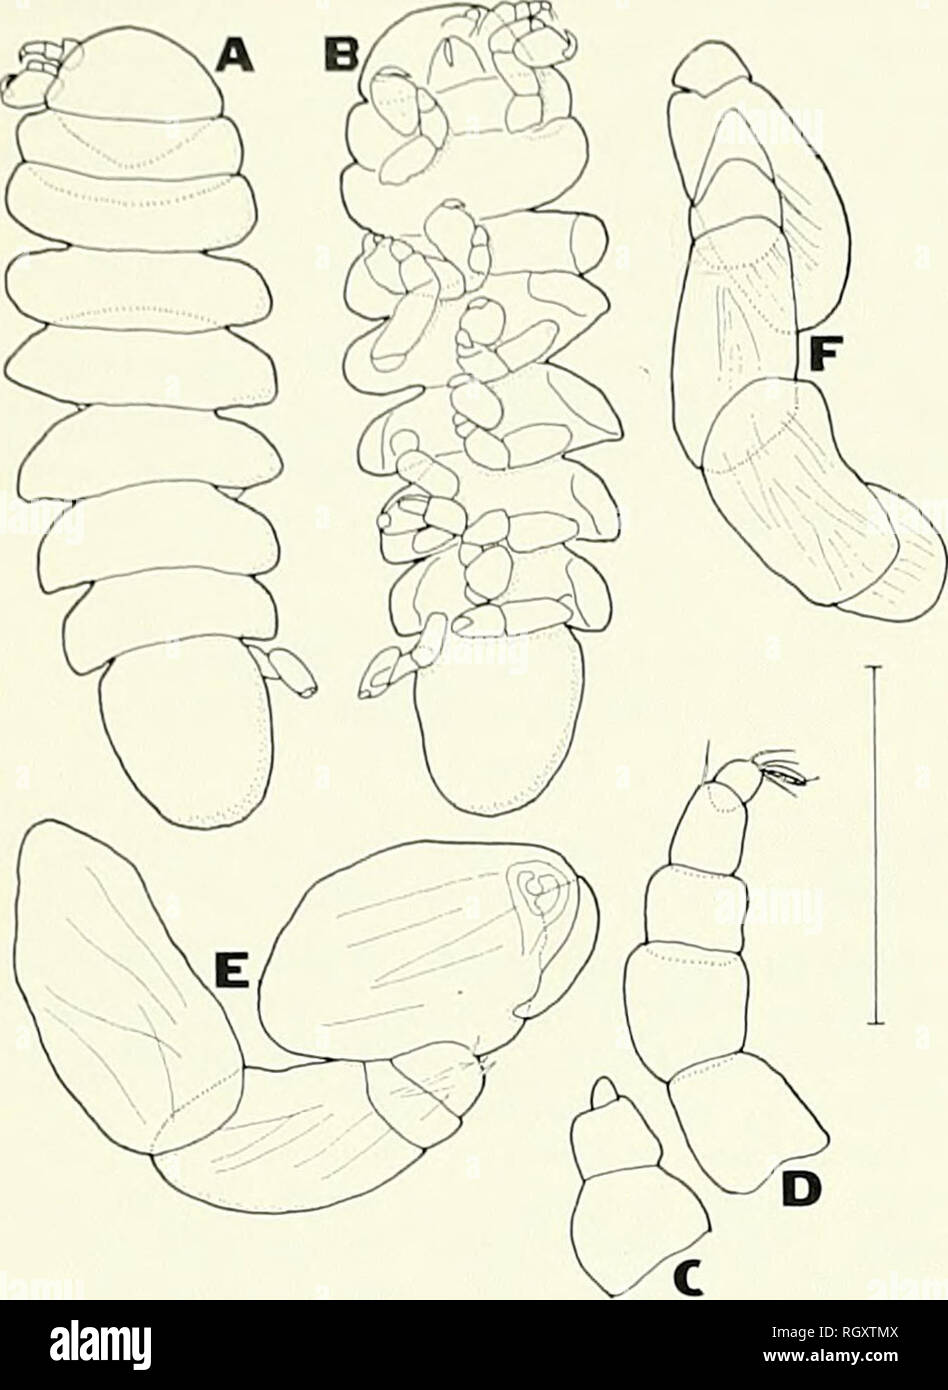 . Bulletin. Science; Natural history; Natural history. 36 Hi III ll SOUTHERh CALIFORNIA ACADEMY OF SCIENCES VOLUME 73. Figure 5. Stegophryxus thompsoni Nierstrasz and Brender a Brandis, allotype male. A. Dorsal view. B. Ventral view. C. Left antenna 1. D. Left antenna 2. E. Right pereopod 1. F. Right pereopod 7. Scale indicates 1.0mm for A, B. 0.2mm for C-F. segments. No eyes. Maxilliped (Fig. 4C) with very irregular outline. Posterior ventral border of head (Fig. 4D) with long pointed lateral projection, ir- regular blunt process medial to it. Pereon surrounding head, first two pereomeres ob Stock Photo